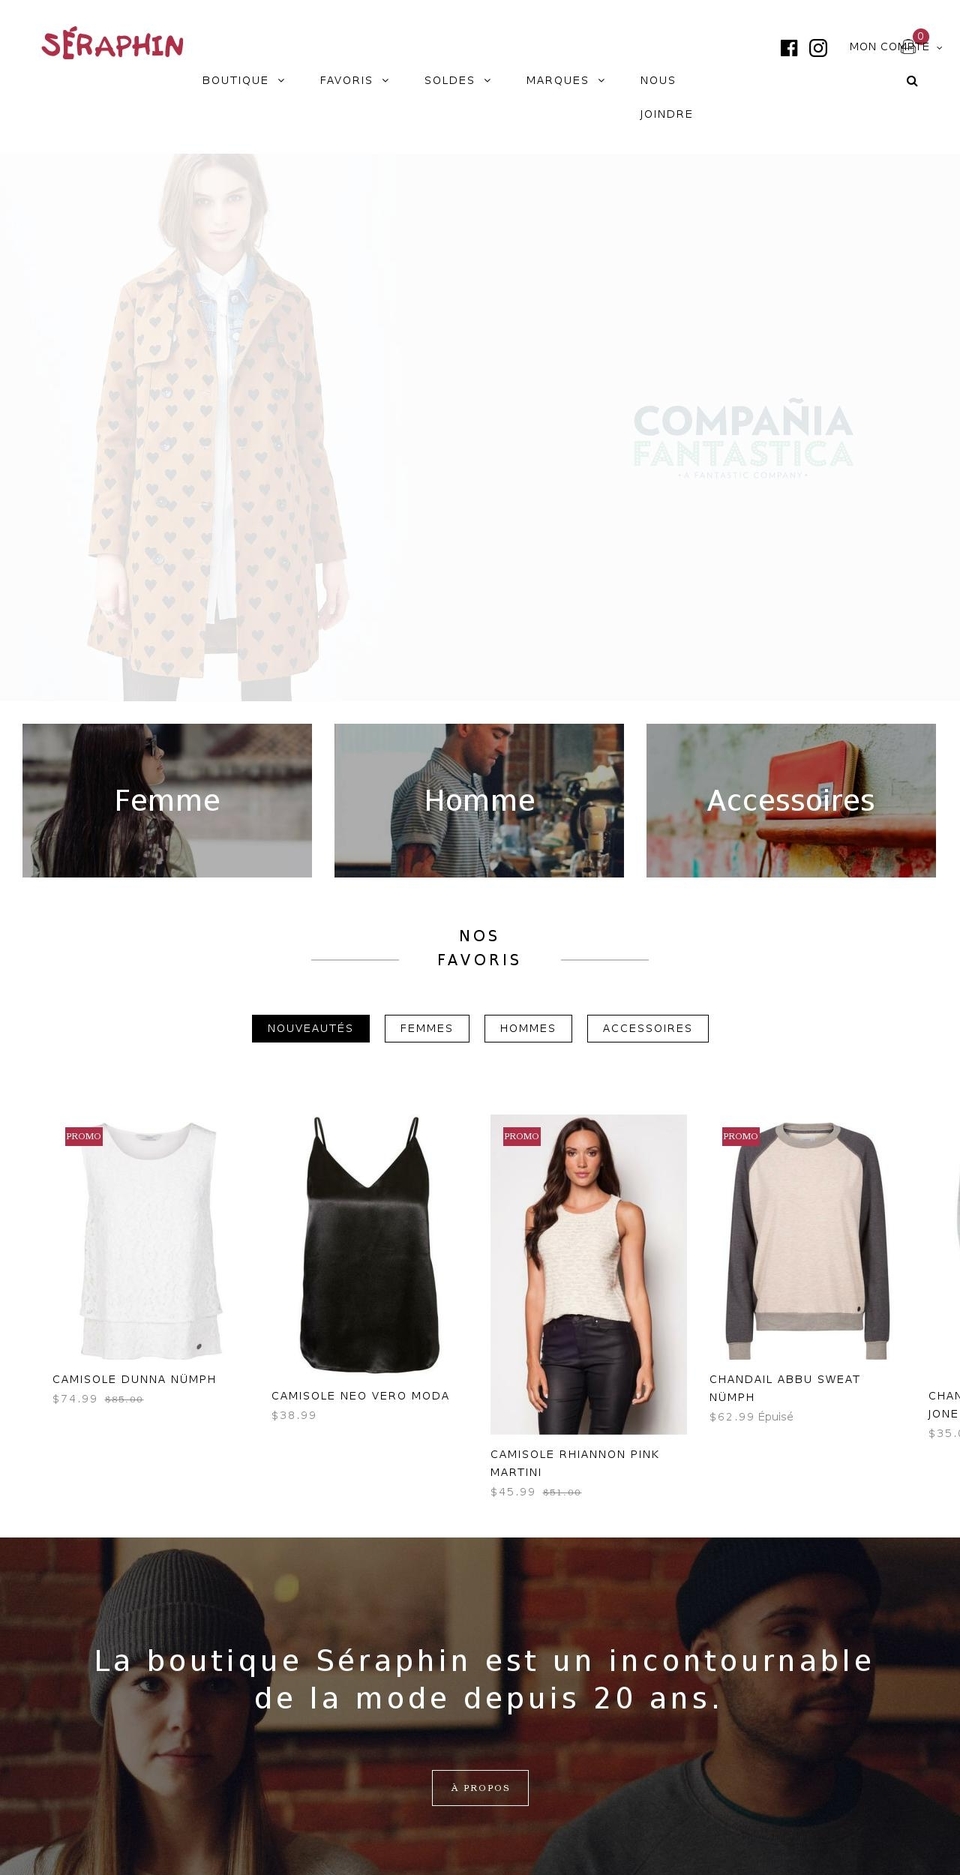 Influence Shopify theme site example boutiqueseraphin.com